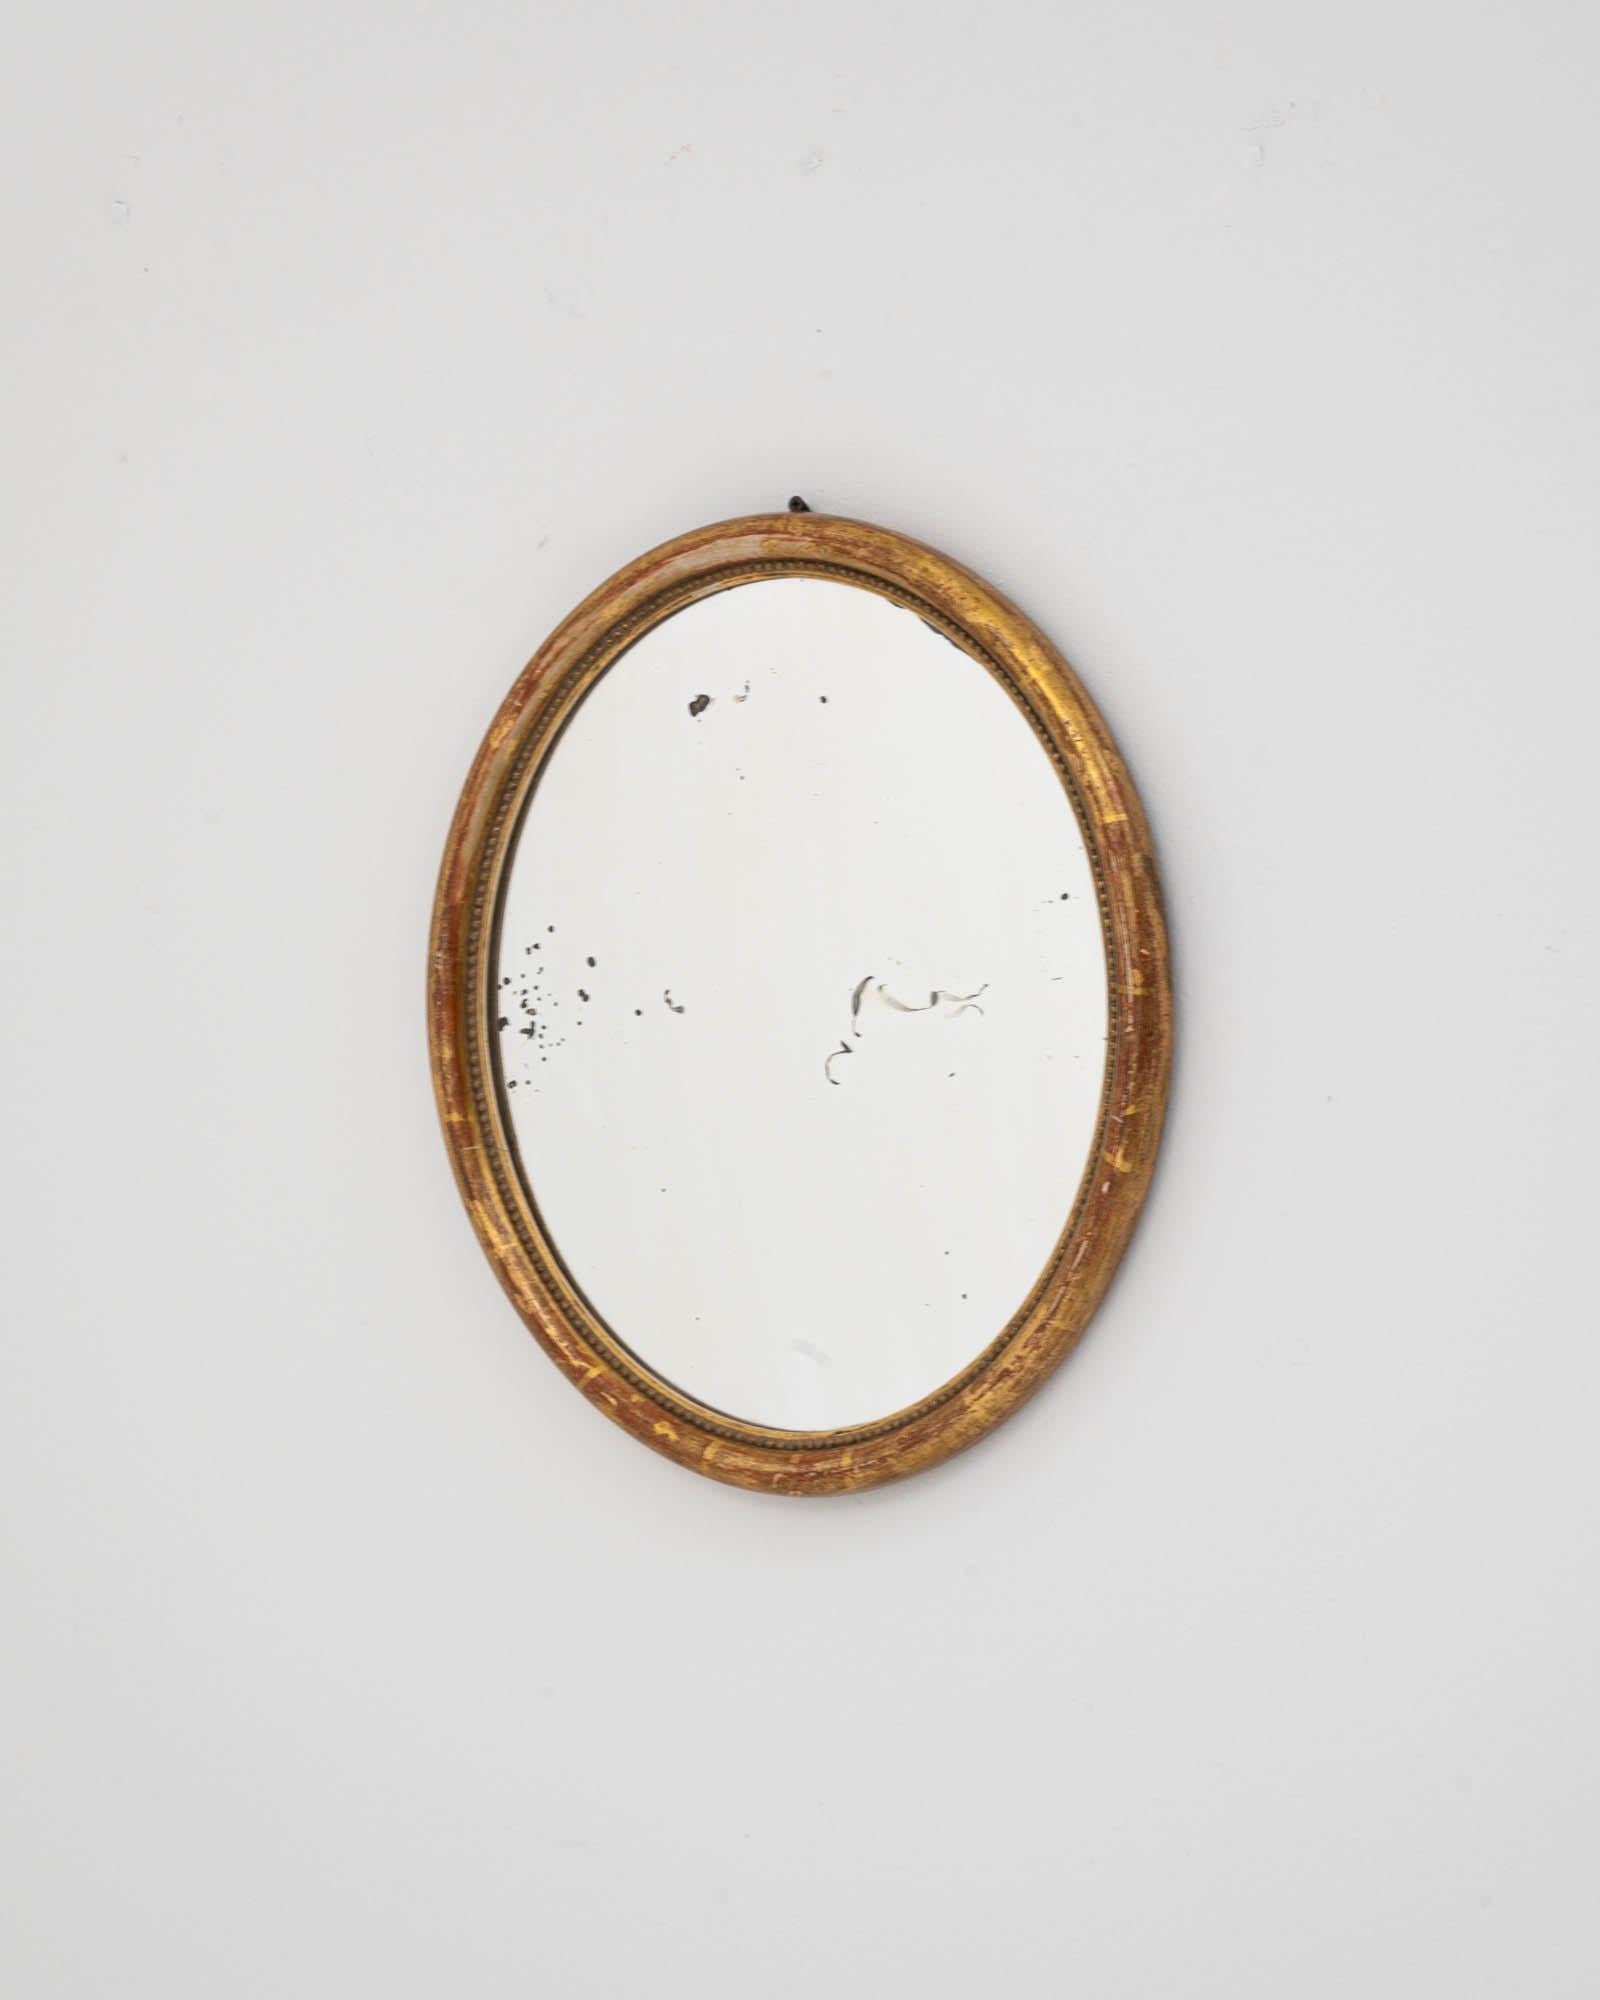 19th Century French Gilded Wood Mirror In Good Condition For Sale In High Point, NC